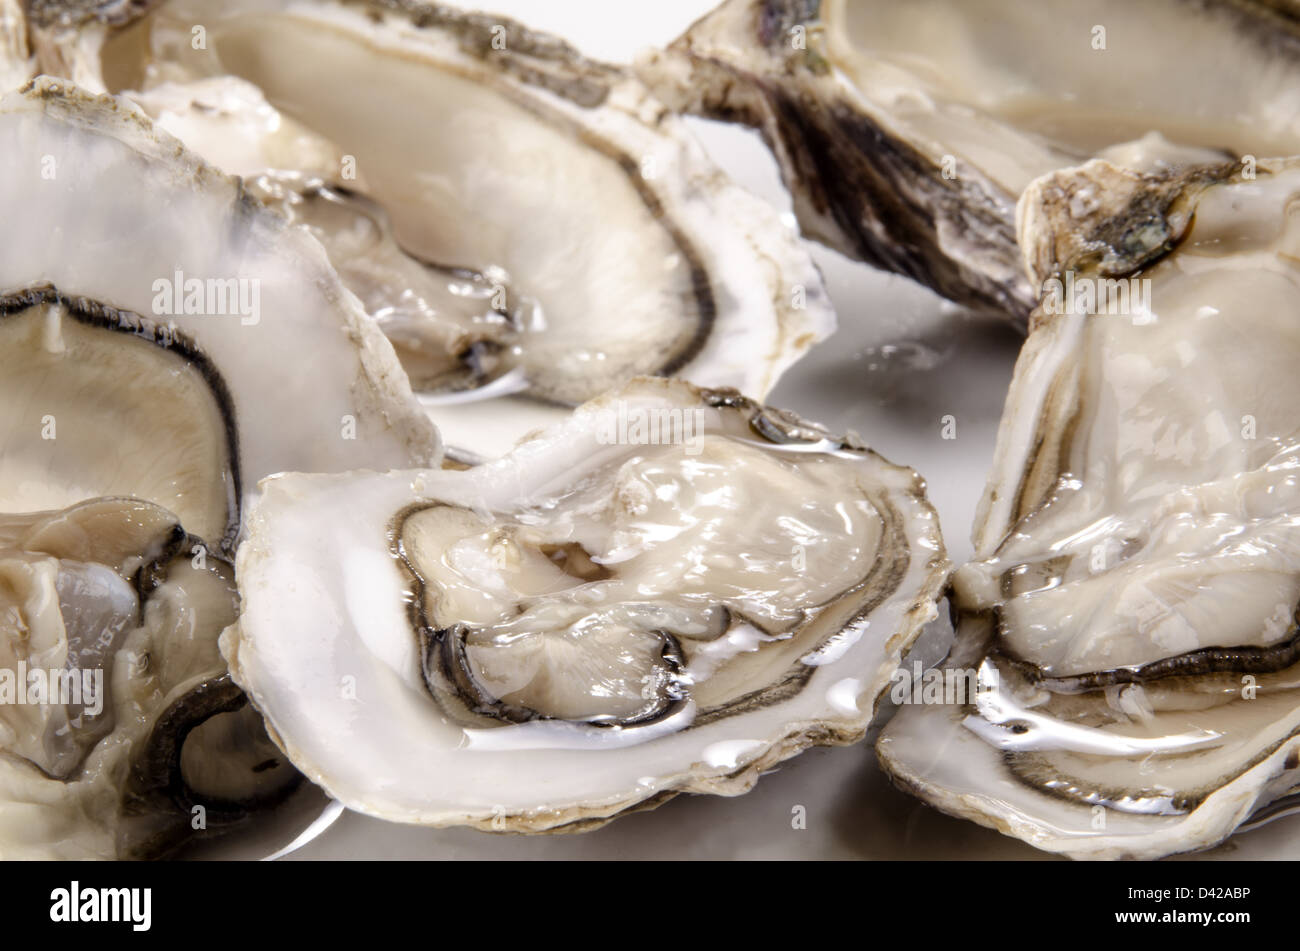 five fresh, open oysters from the west coast of Ireland Stock Photo